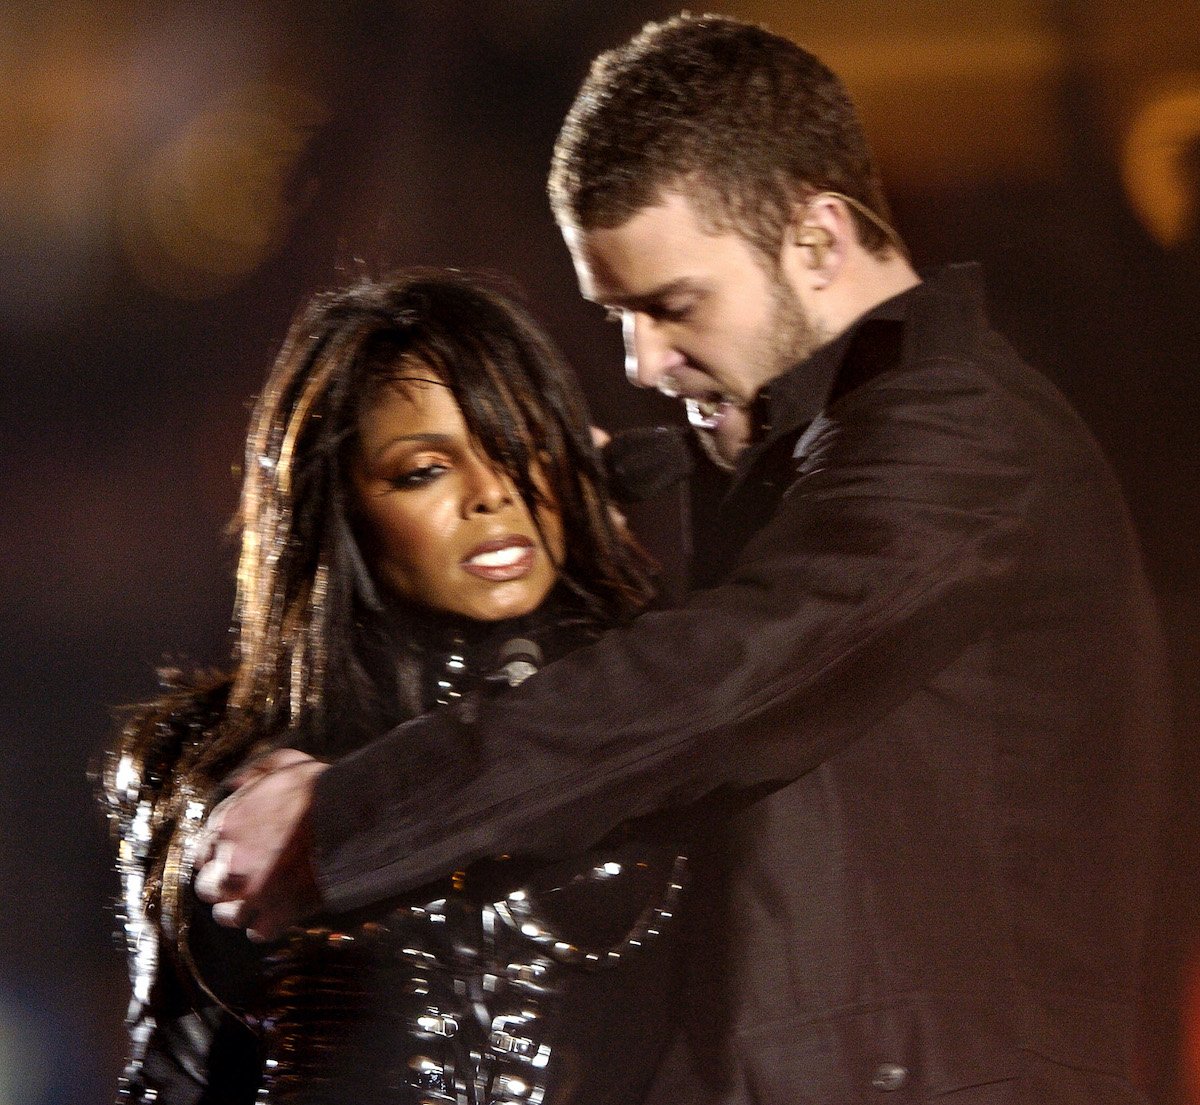 Janet Jackson and Justin Timberlake at the Super Bowl Halftime show in 2004